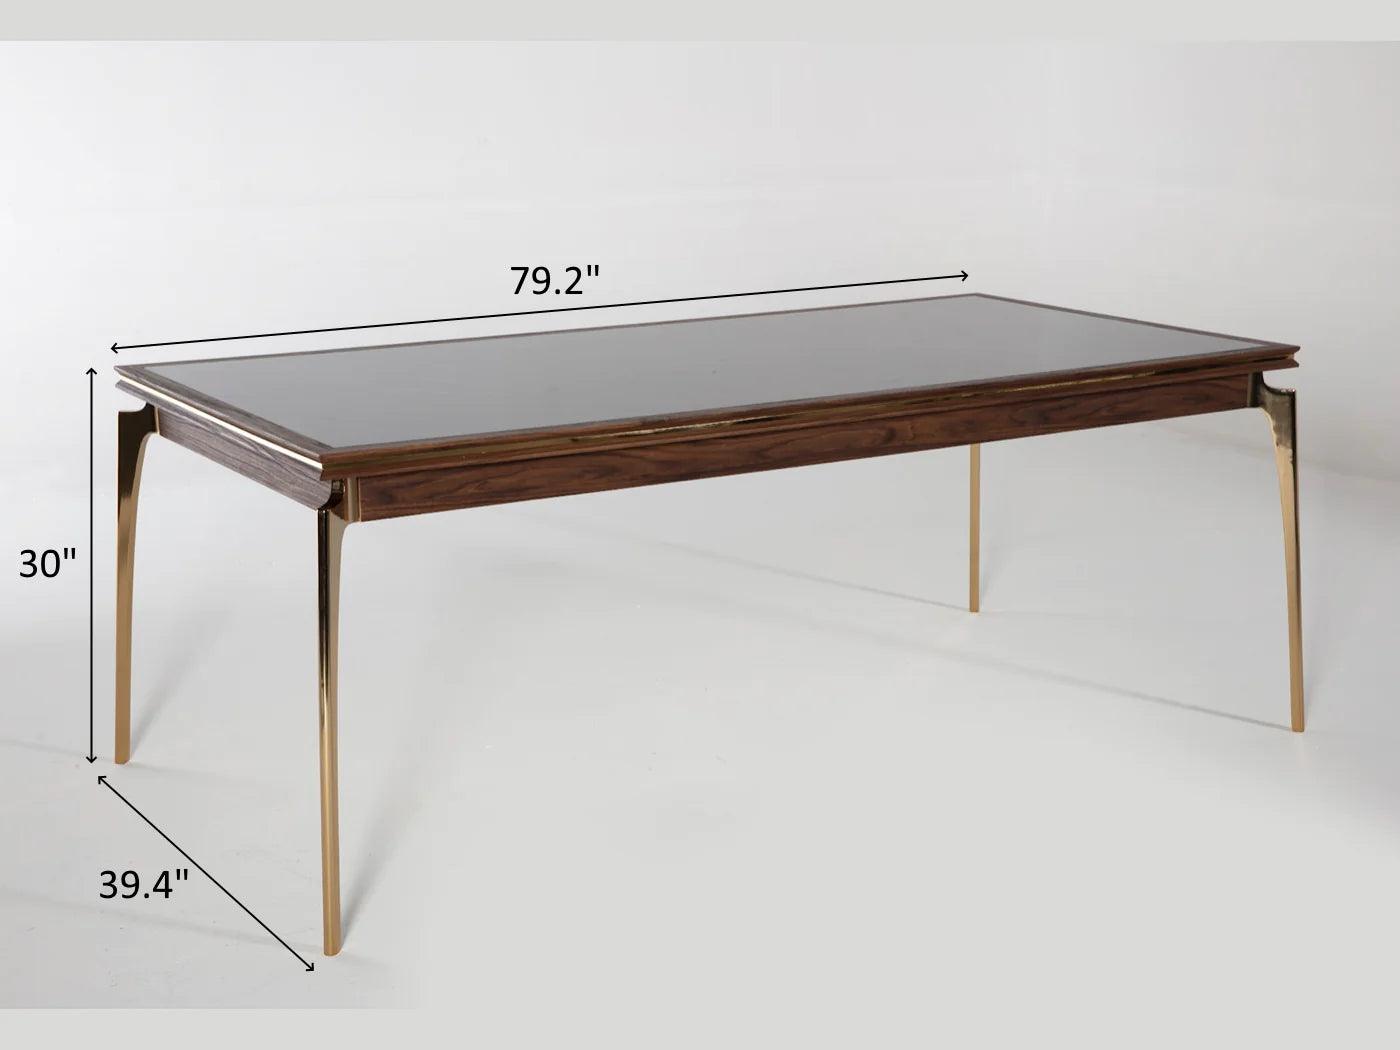 Montego Dining Table